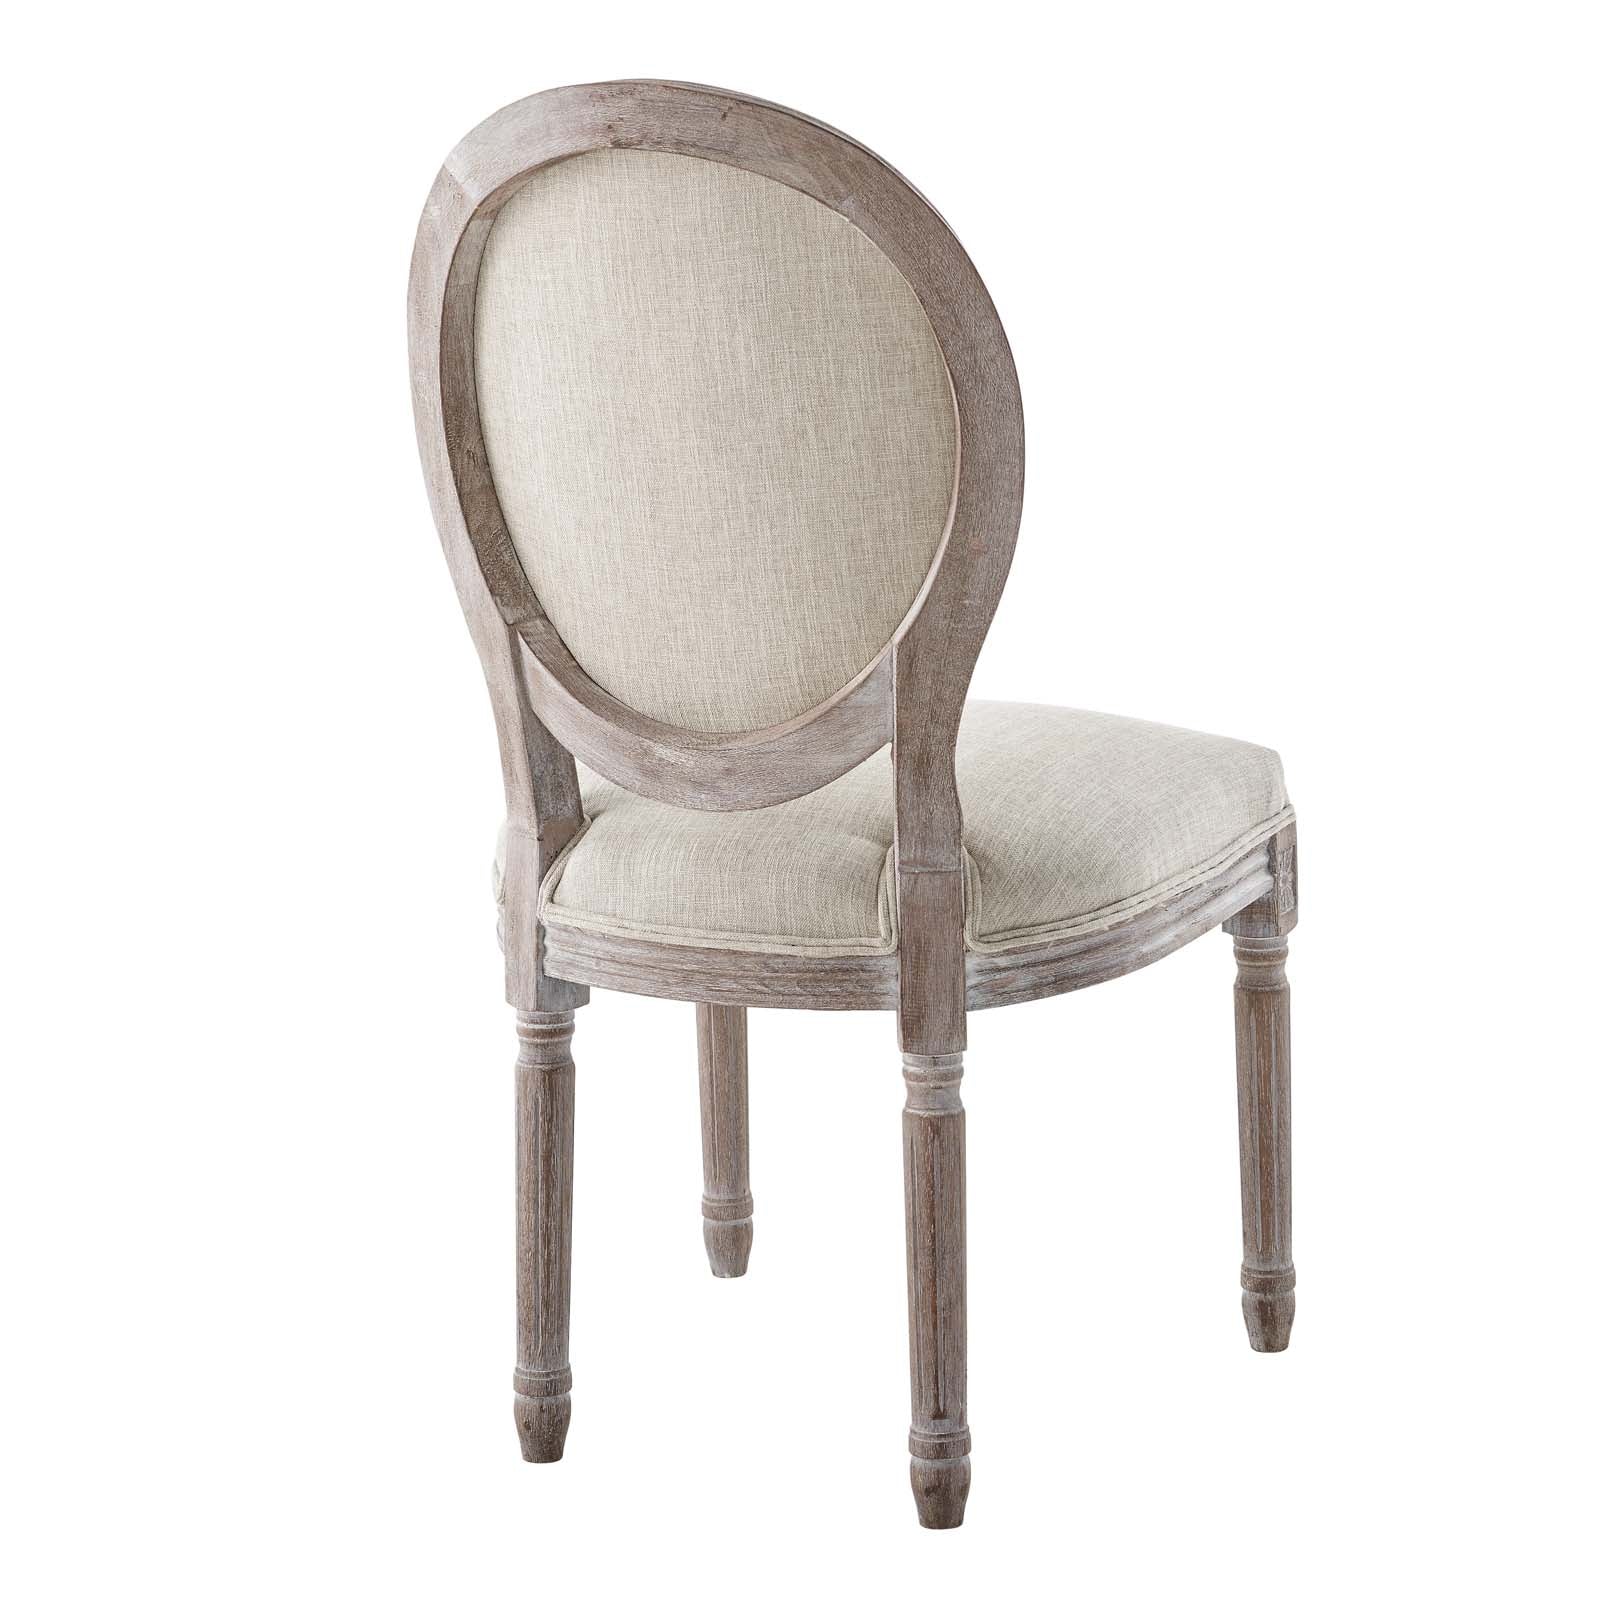 Modway Dining Chairs - Arise Vintage French Upholstered Fabric Dining Side Chair Beige (Set of 2)